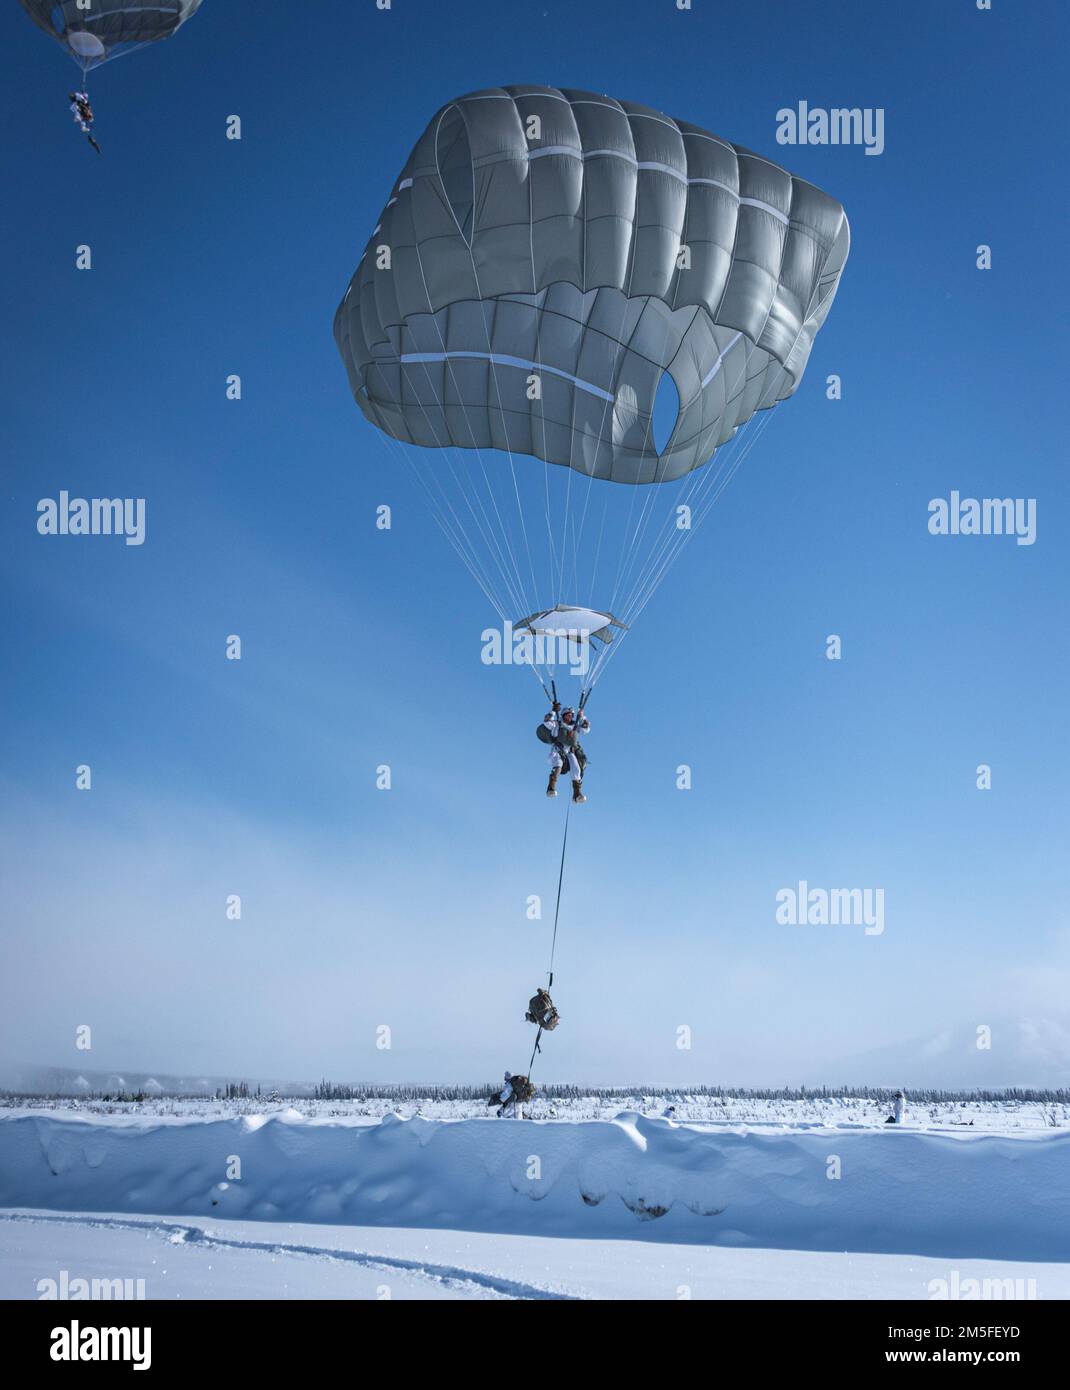 Soldier from United States Army Alaska along with members of the 3rd Battalion, Royal 22e Régiment Canadian Army parachute to the ground after jumping out of C-130 and C-17 aircraft over the training area of Fort Greely, AK during Joint Pacific Multinational Readiness Center 22-02 March 11, 2022. During JPMRC22-02 US Army Alaska joins with partner nations on multinational training exercises and interoperability as fundamental strategic and operational priorities to deter adversaries.   (Photo provided by Master Sailor Canadian Forces Combat Camera) Stock Photo